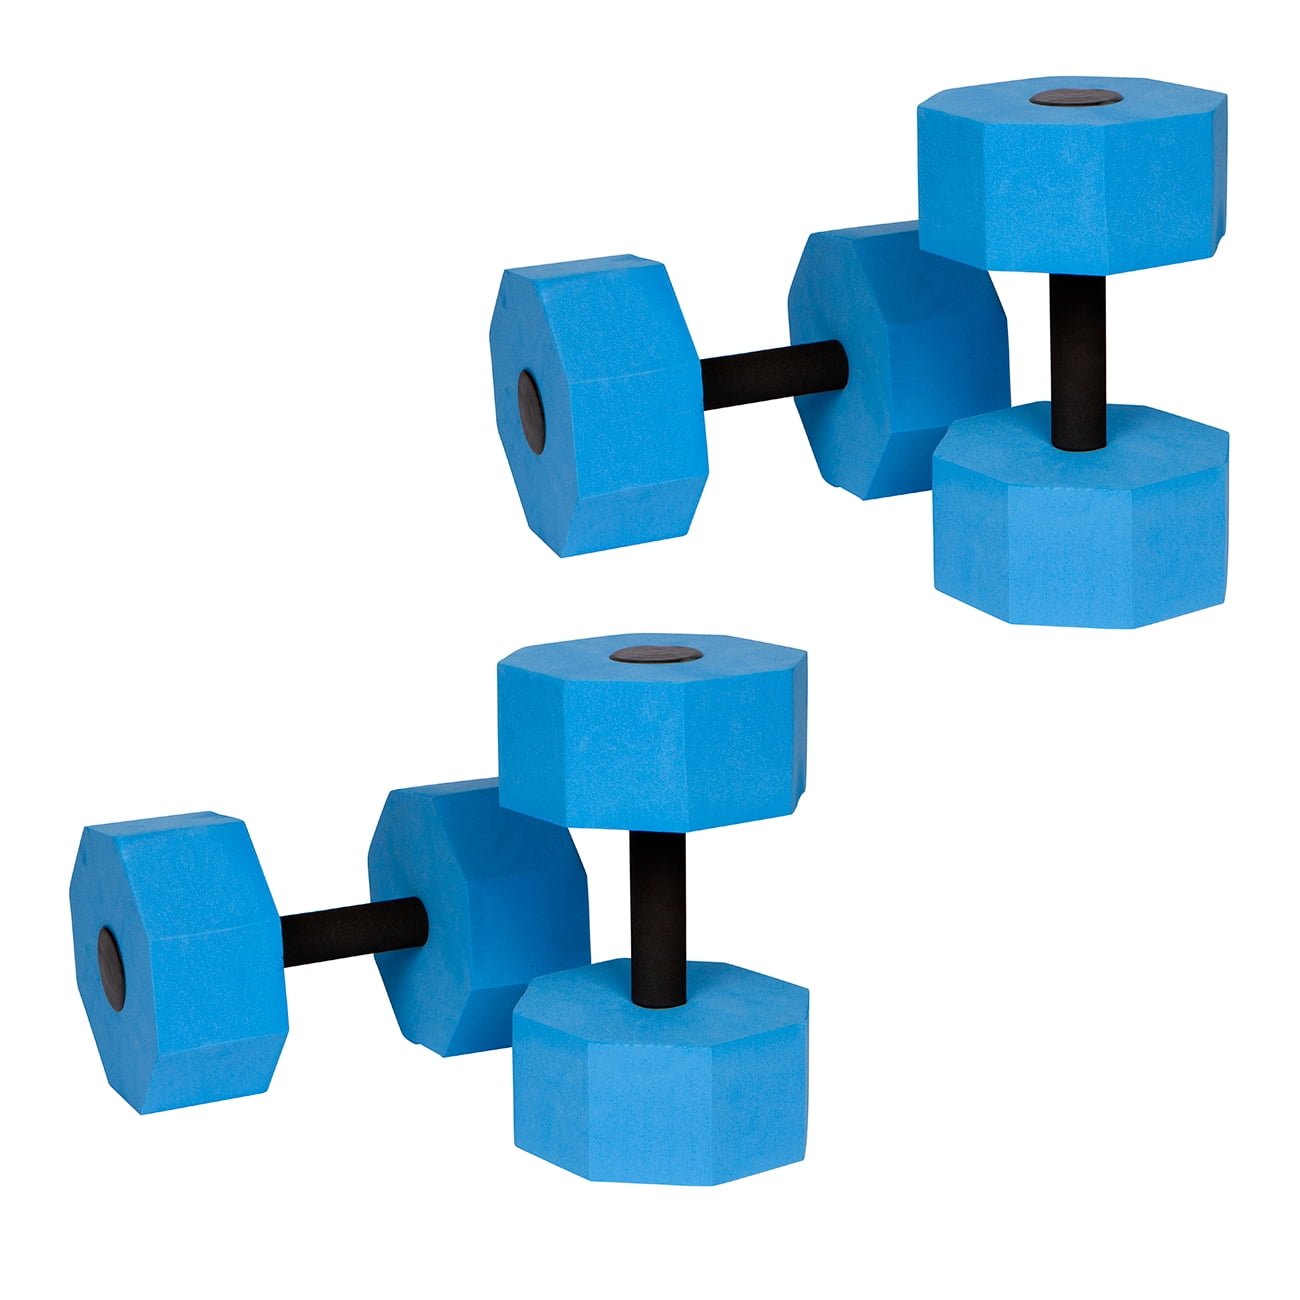 Water Aerobics Aqua Force DOUBLE DISC Barbell Dumbbell STRONG Resistance BLACK 